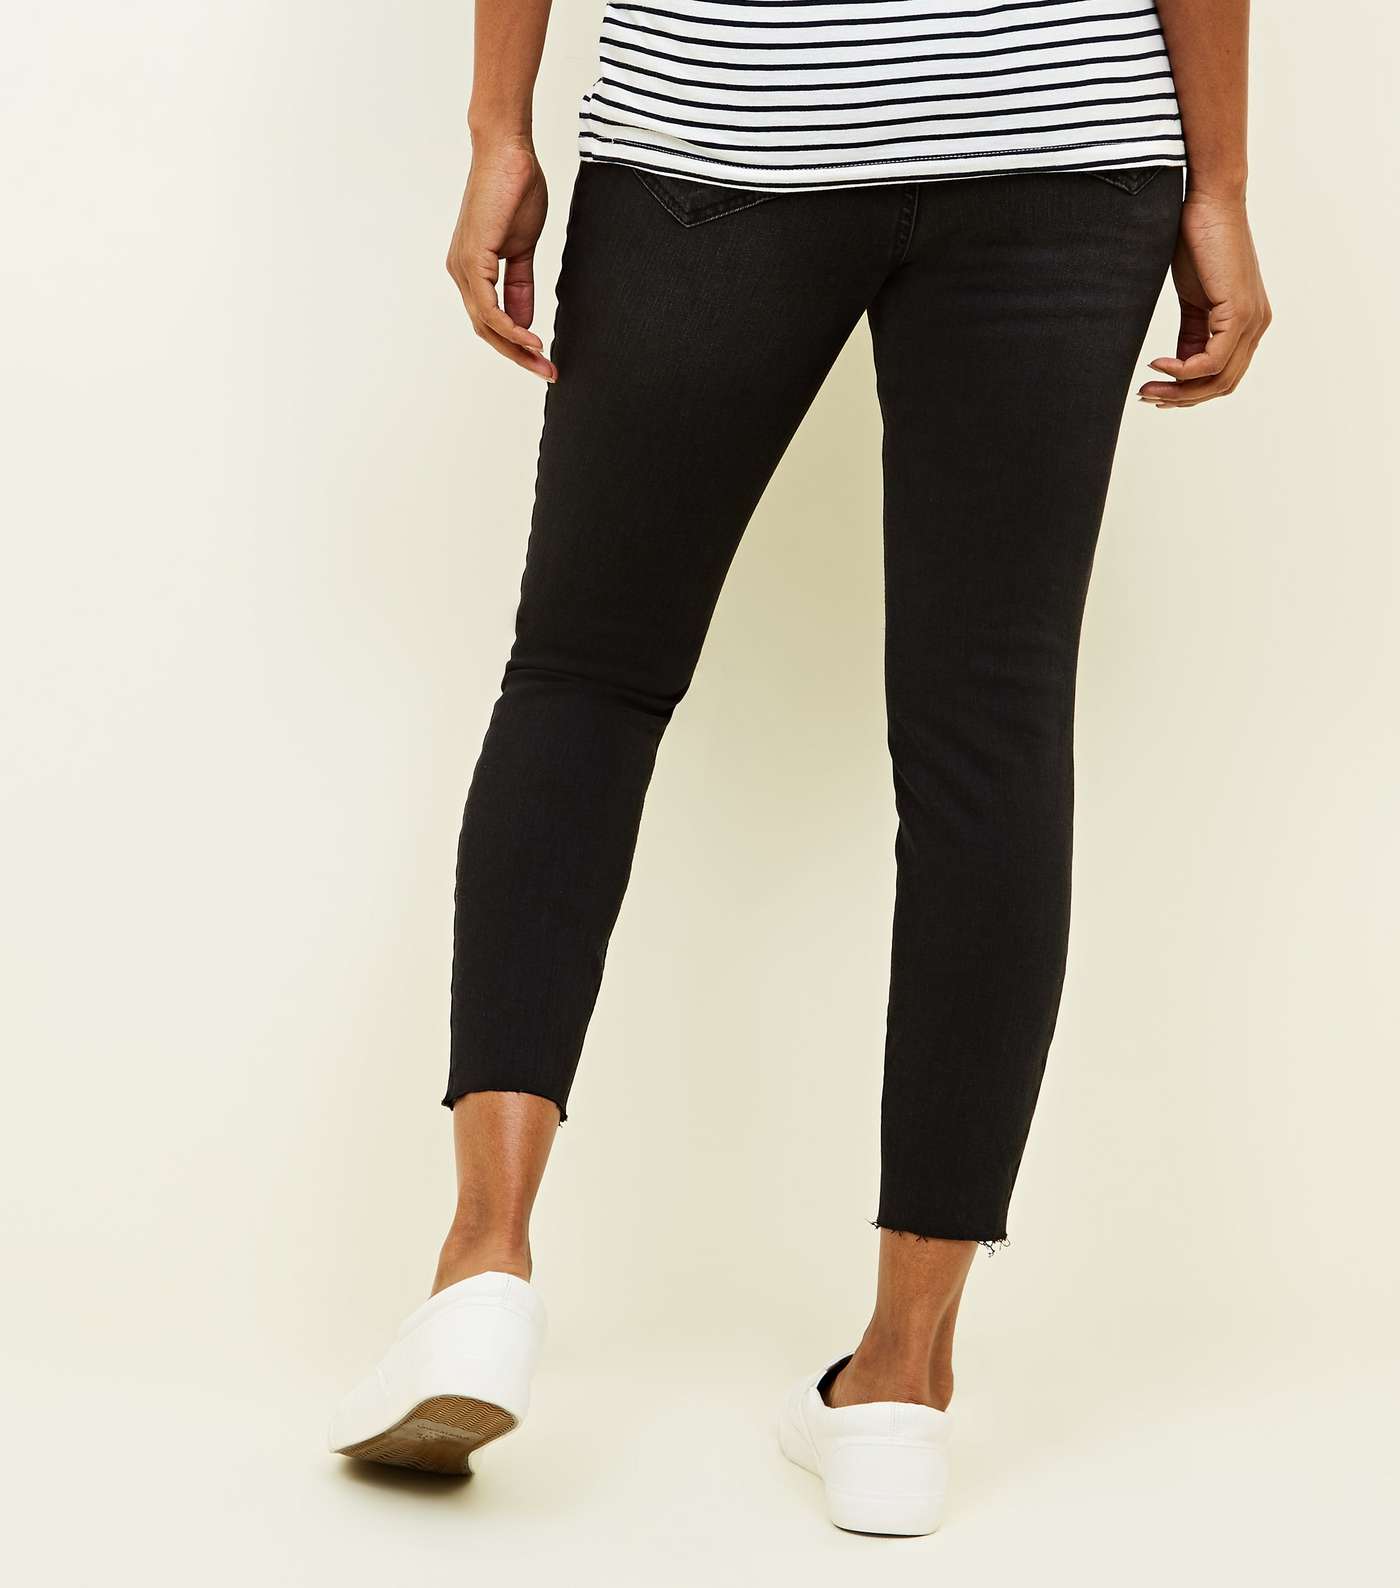 Maternity Black Rinse Wash Ripped Under Bump Skinny Jeans Image 3